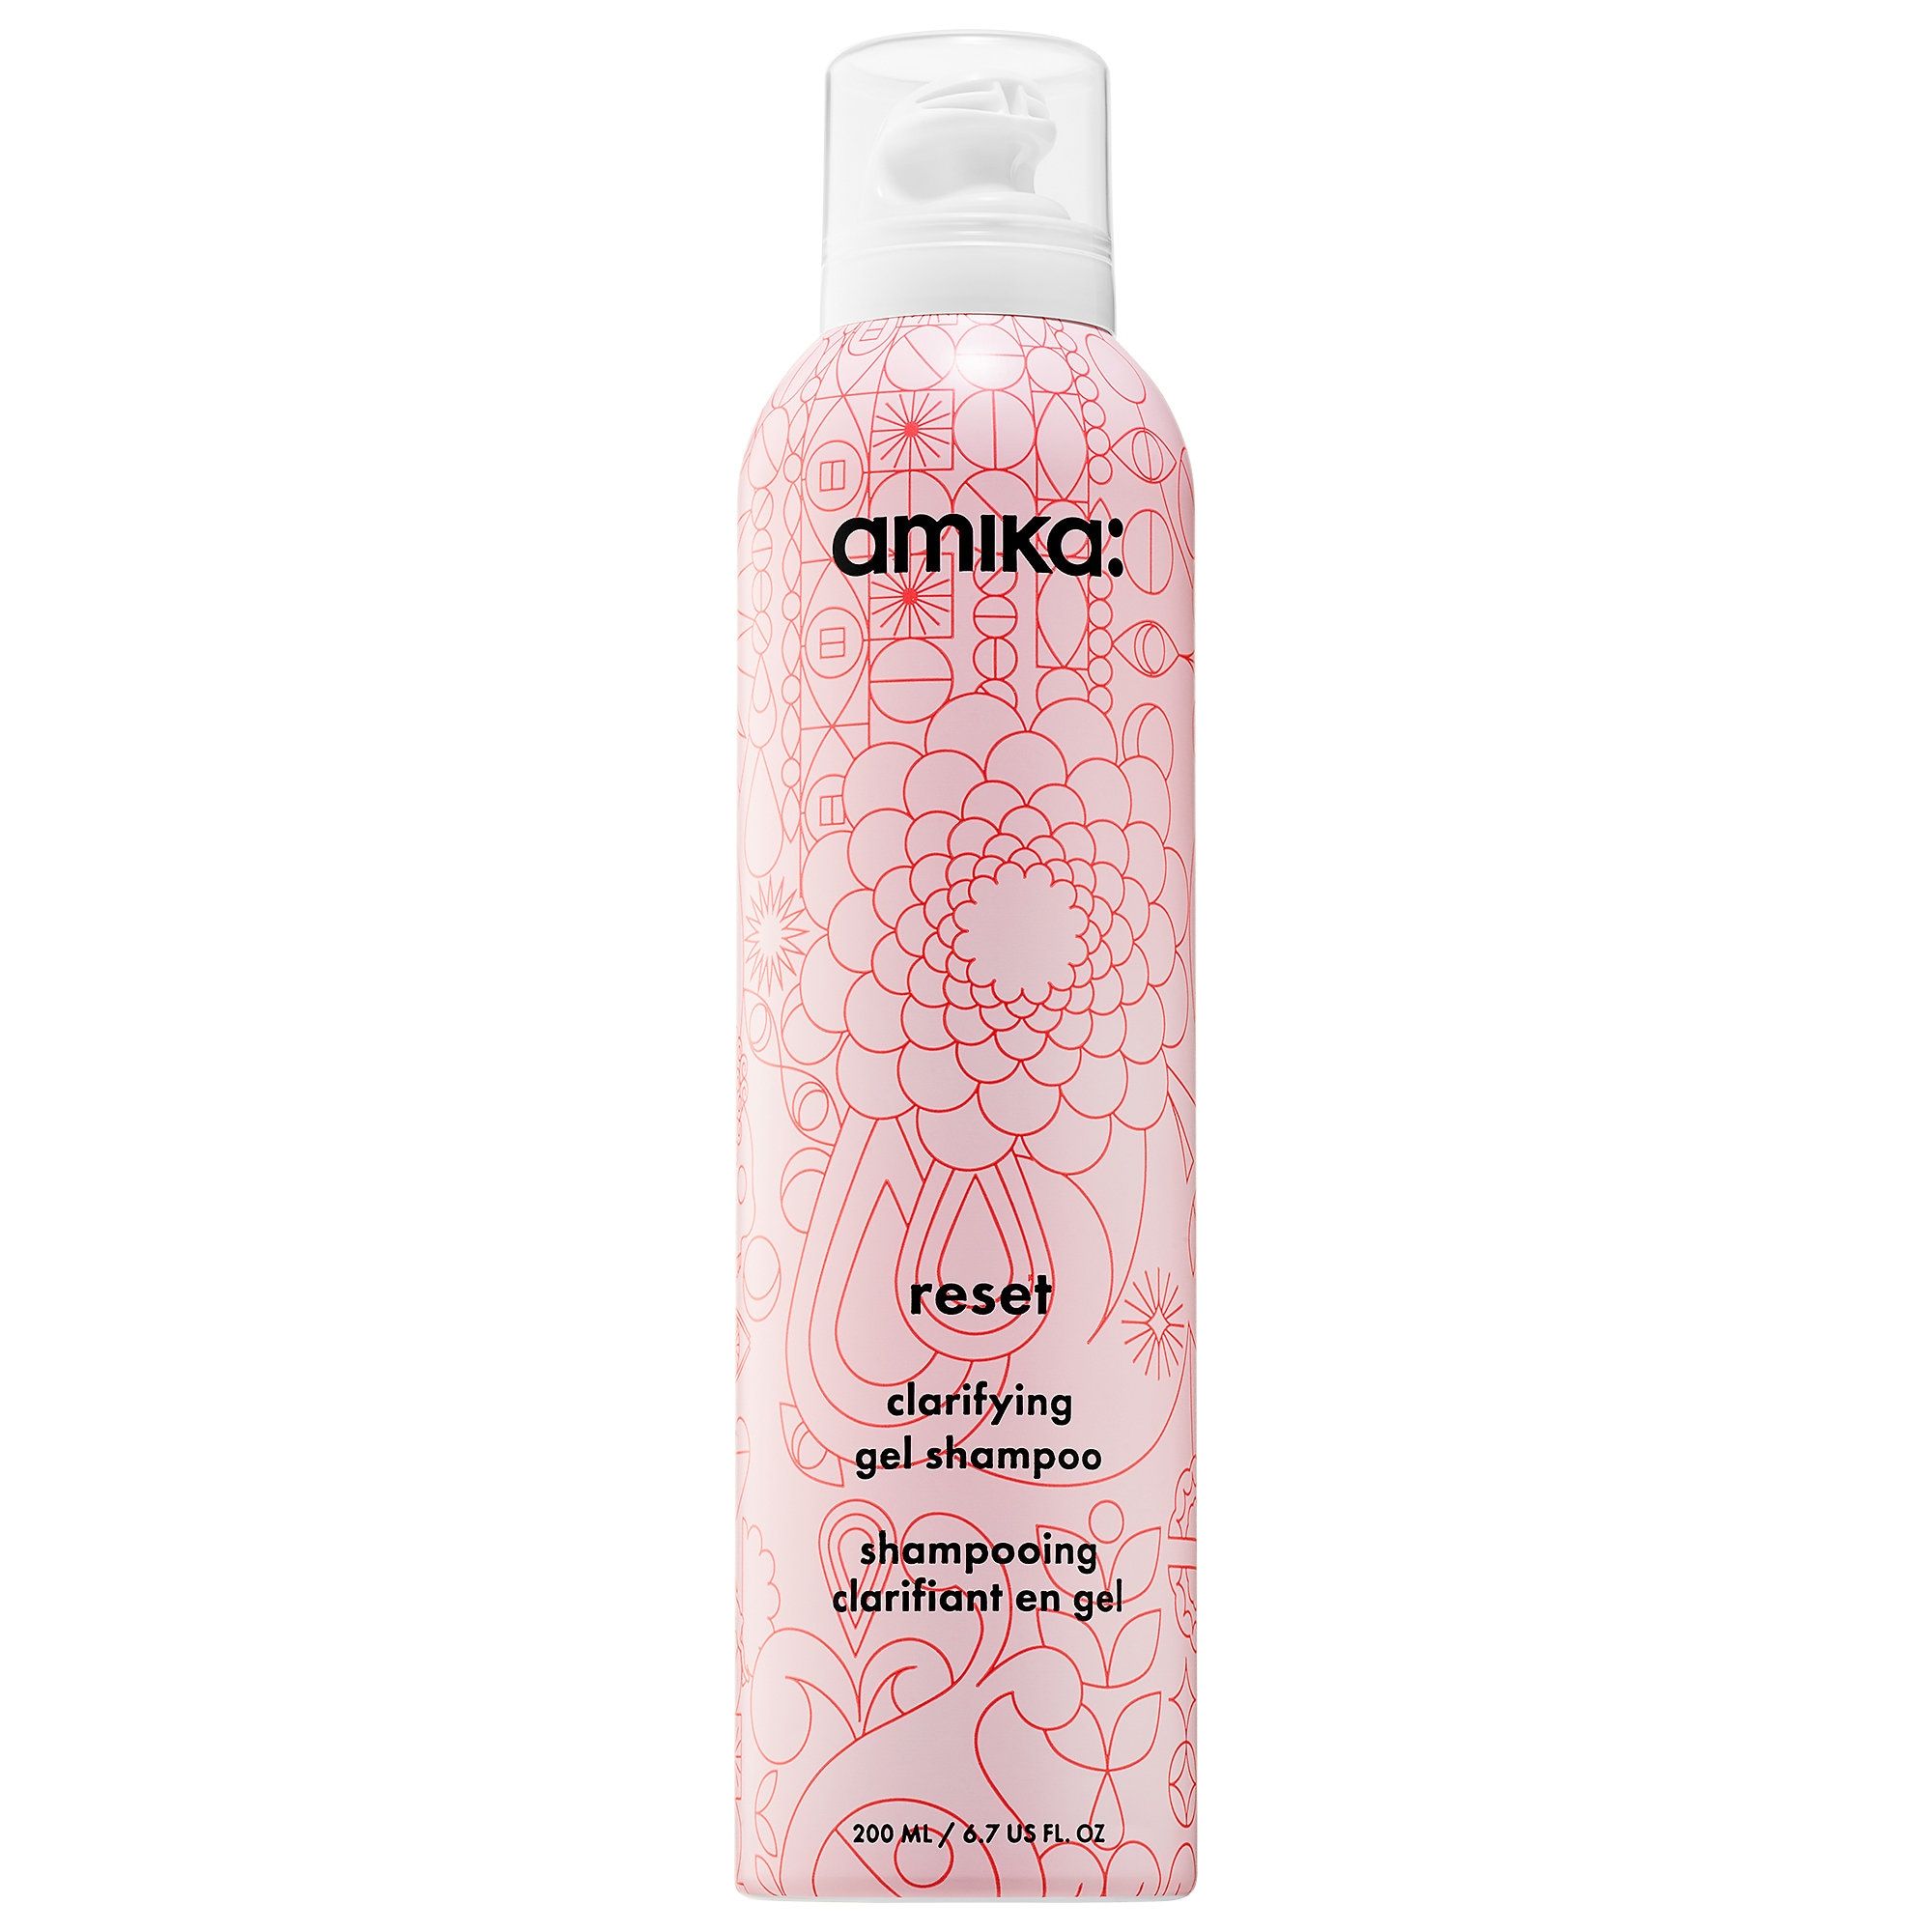 What do we think of this clarifying shampoo  rcurlyhair